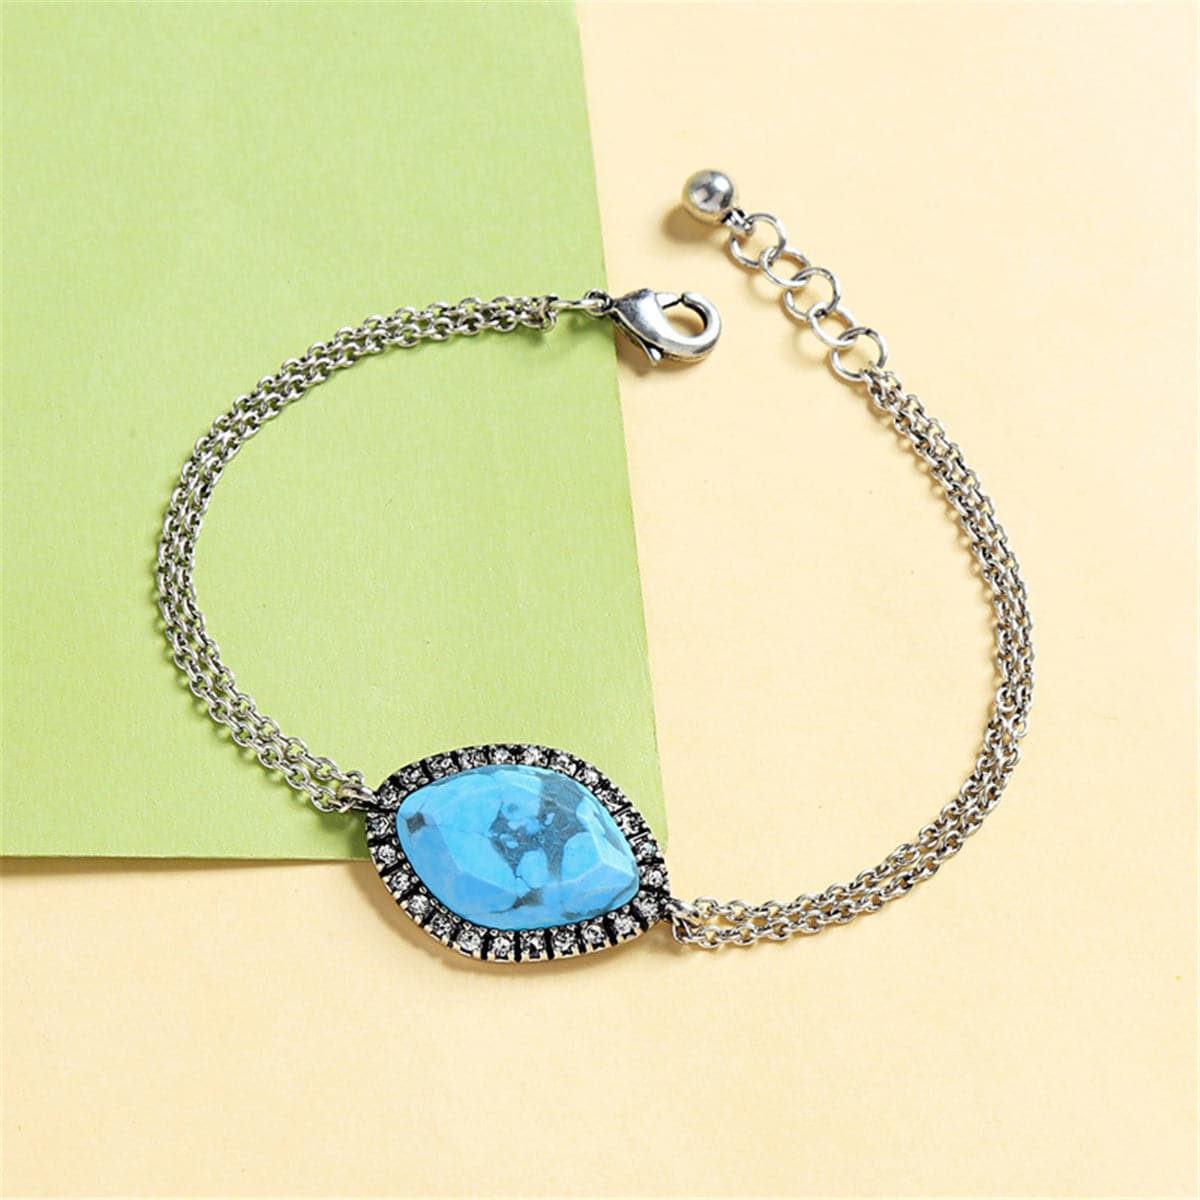 Turquoise & Cubic Zirconia Silver-Plated Adjustable Bracelet